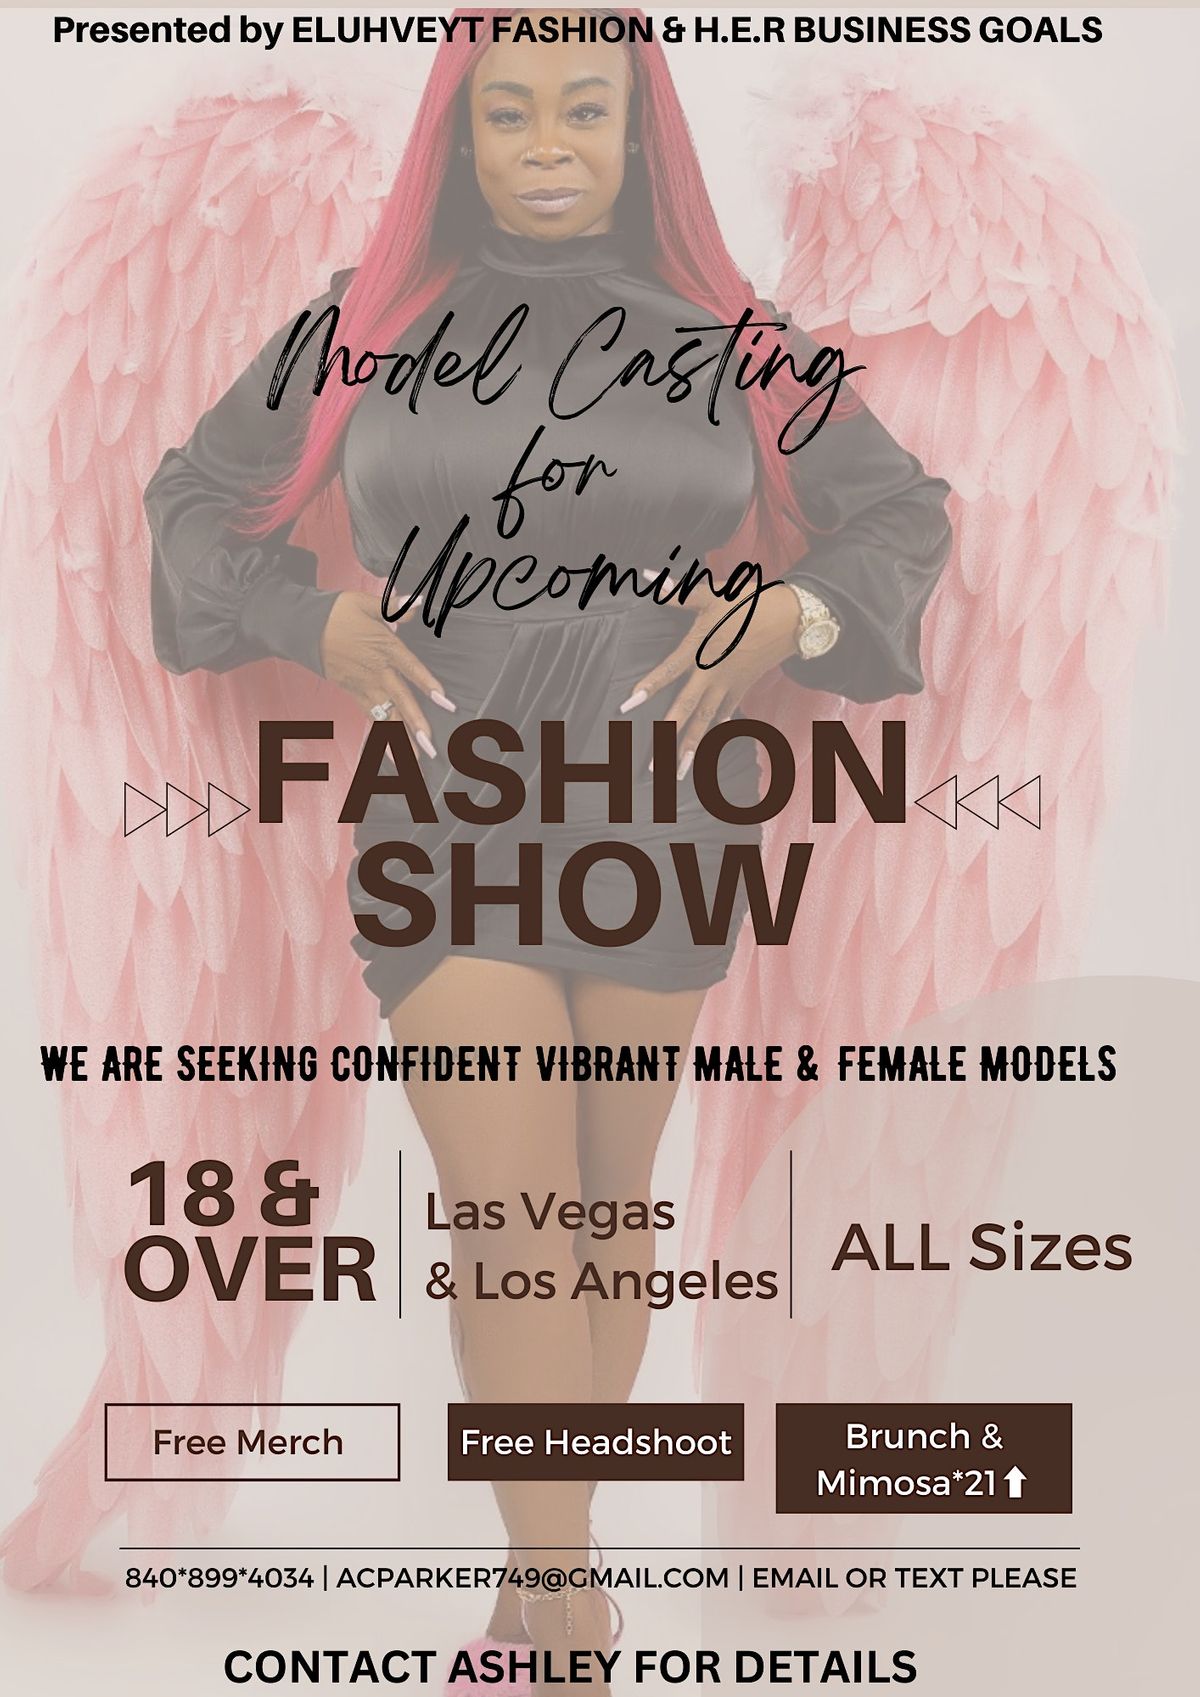 CALLING FASHION DESIGNERS, OWNERS & MALE & FEMALE MODELS TEXAS , ATL